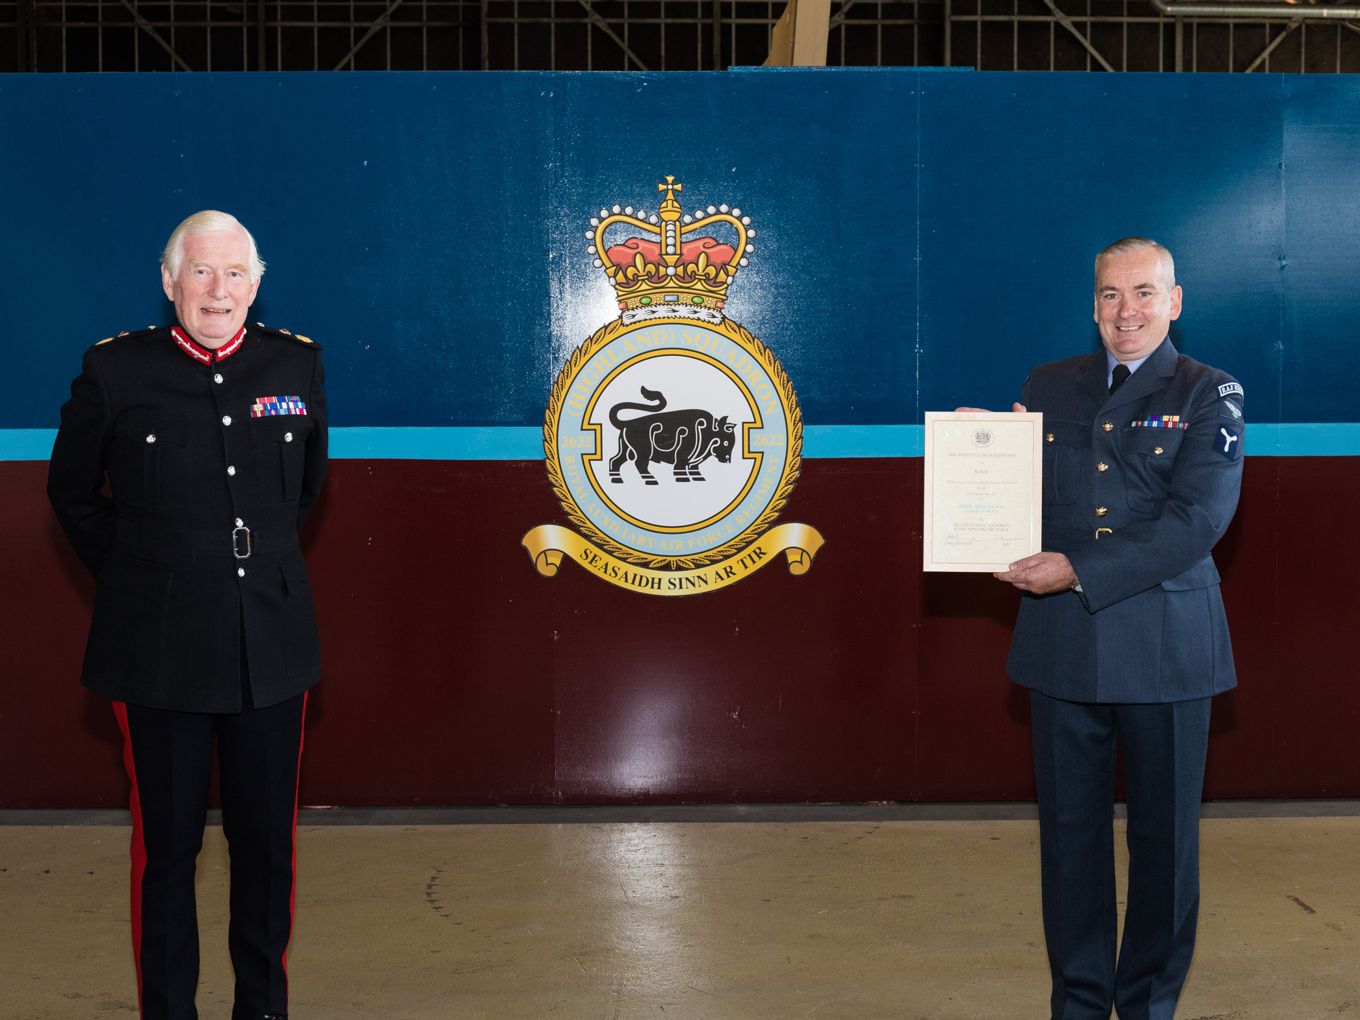 SAC Imlah is presented with his award by the Lord-Lieutenant of Moray, Major General Seymour Munro.